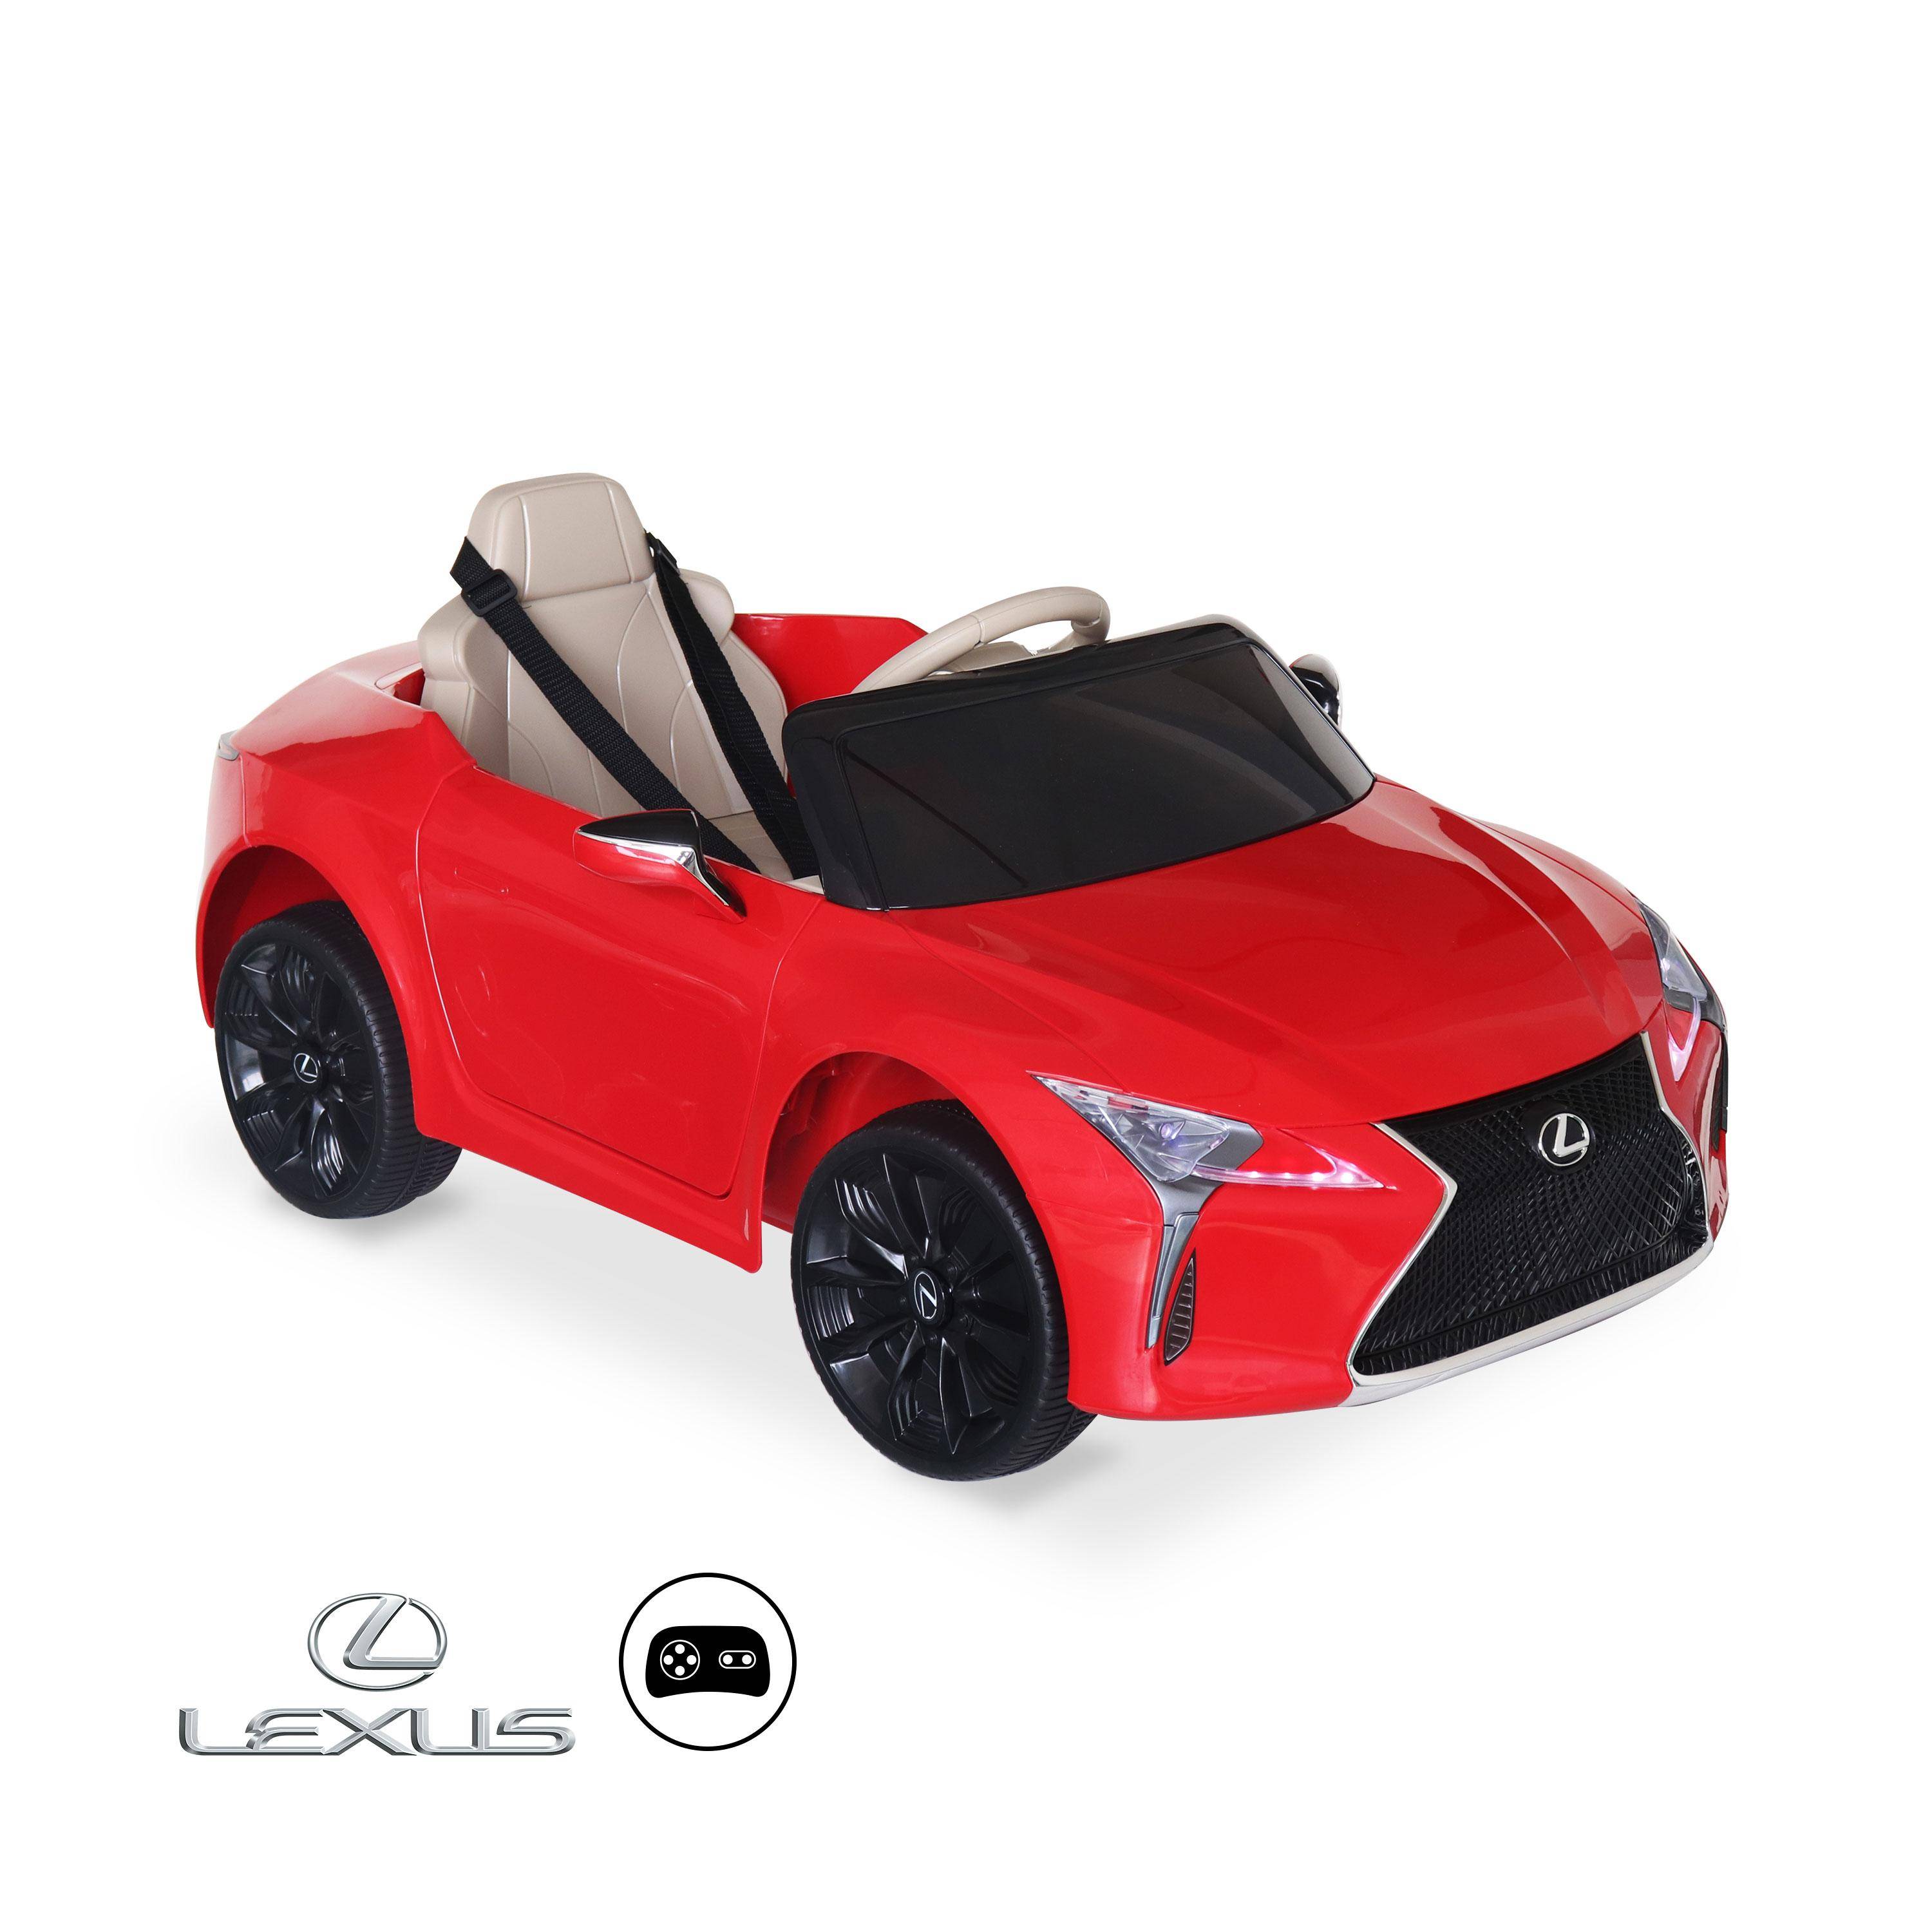 Children's electric car 12V, 1 seat, 4x4 with car radio and remote control - Lexus LC500 - Red,sweeek,Photo1